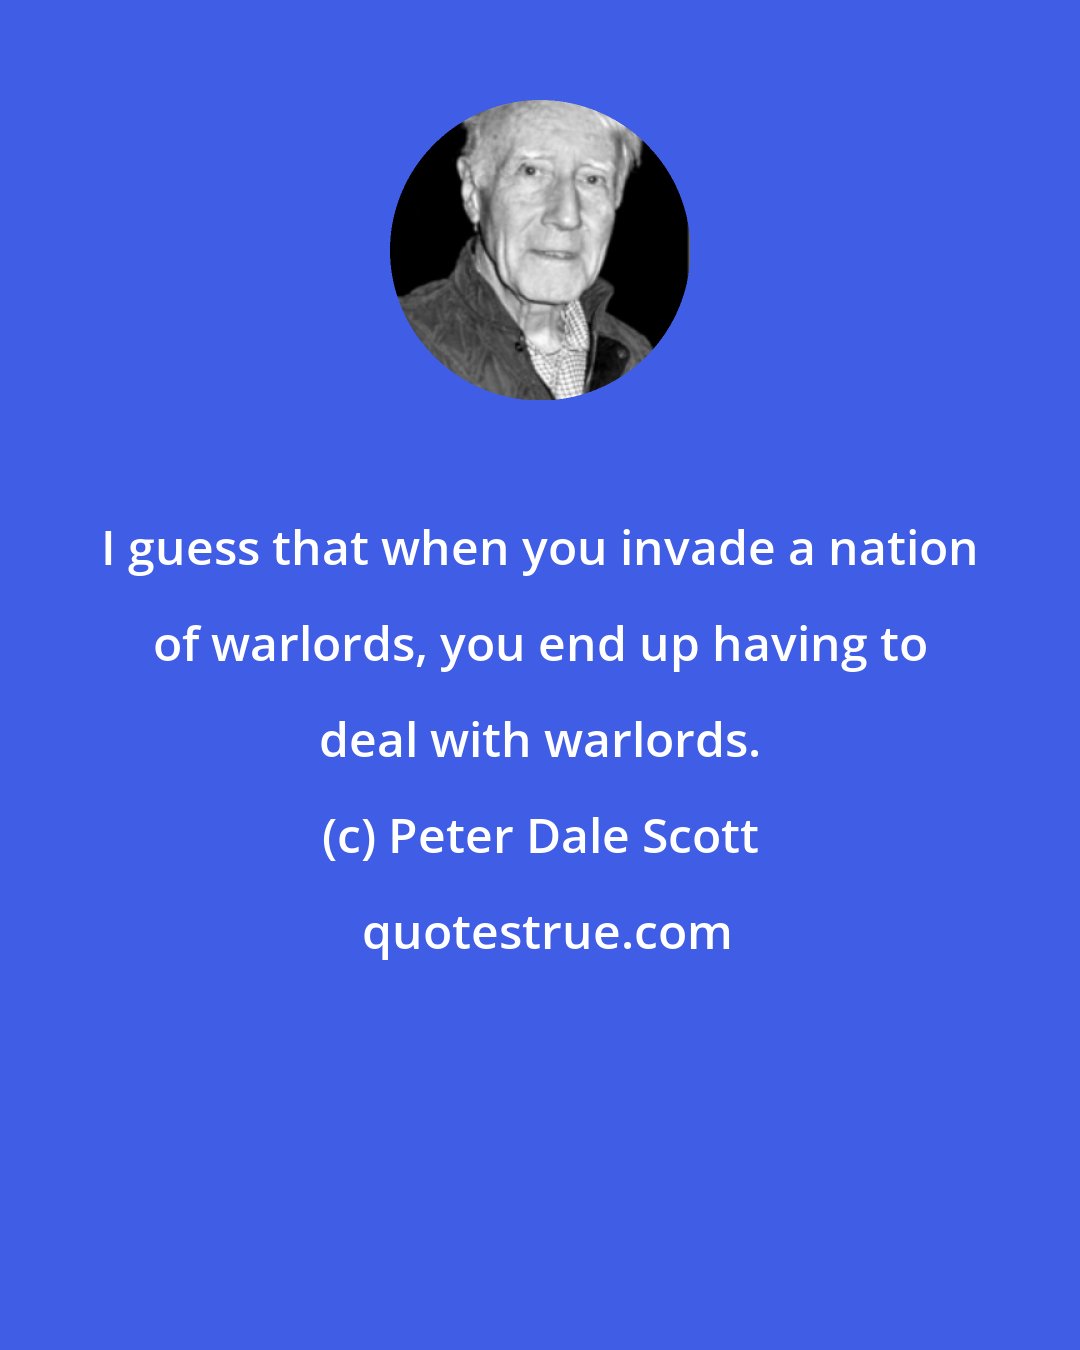 Peter Dale Scott: I guess that when you invade a nation of warlords, you end up having to deal with warlords.